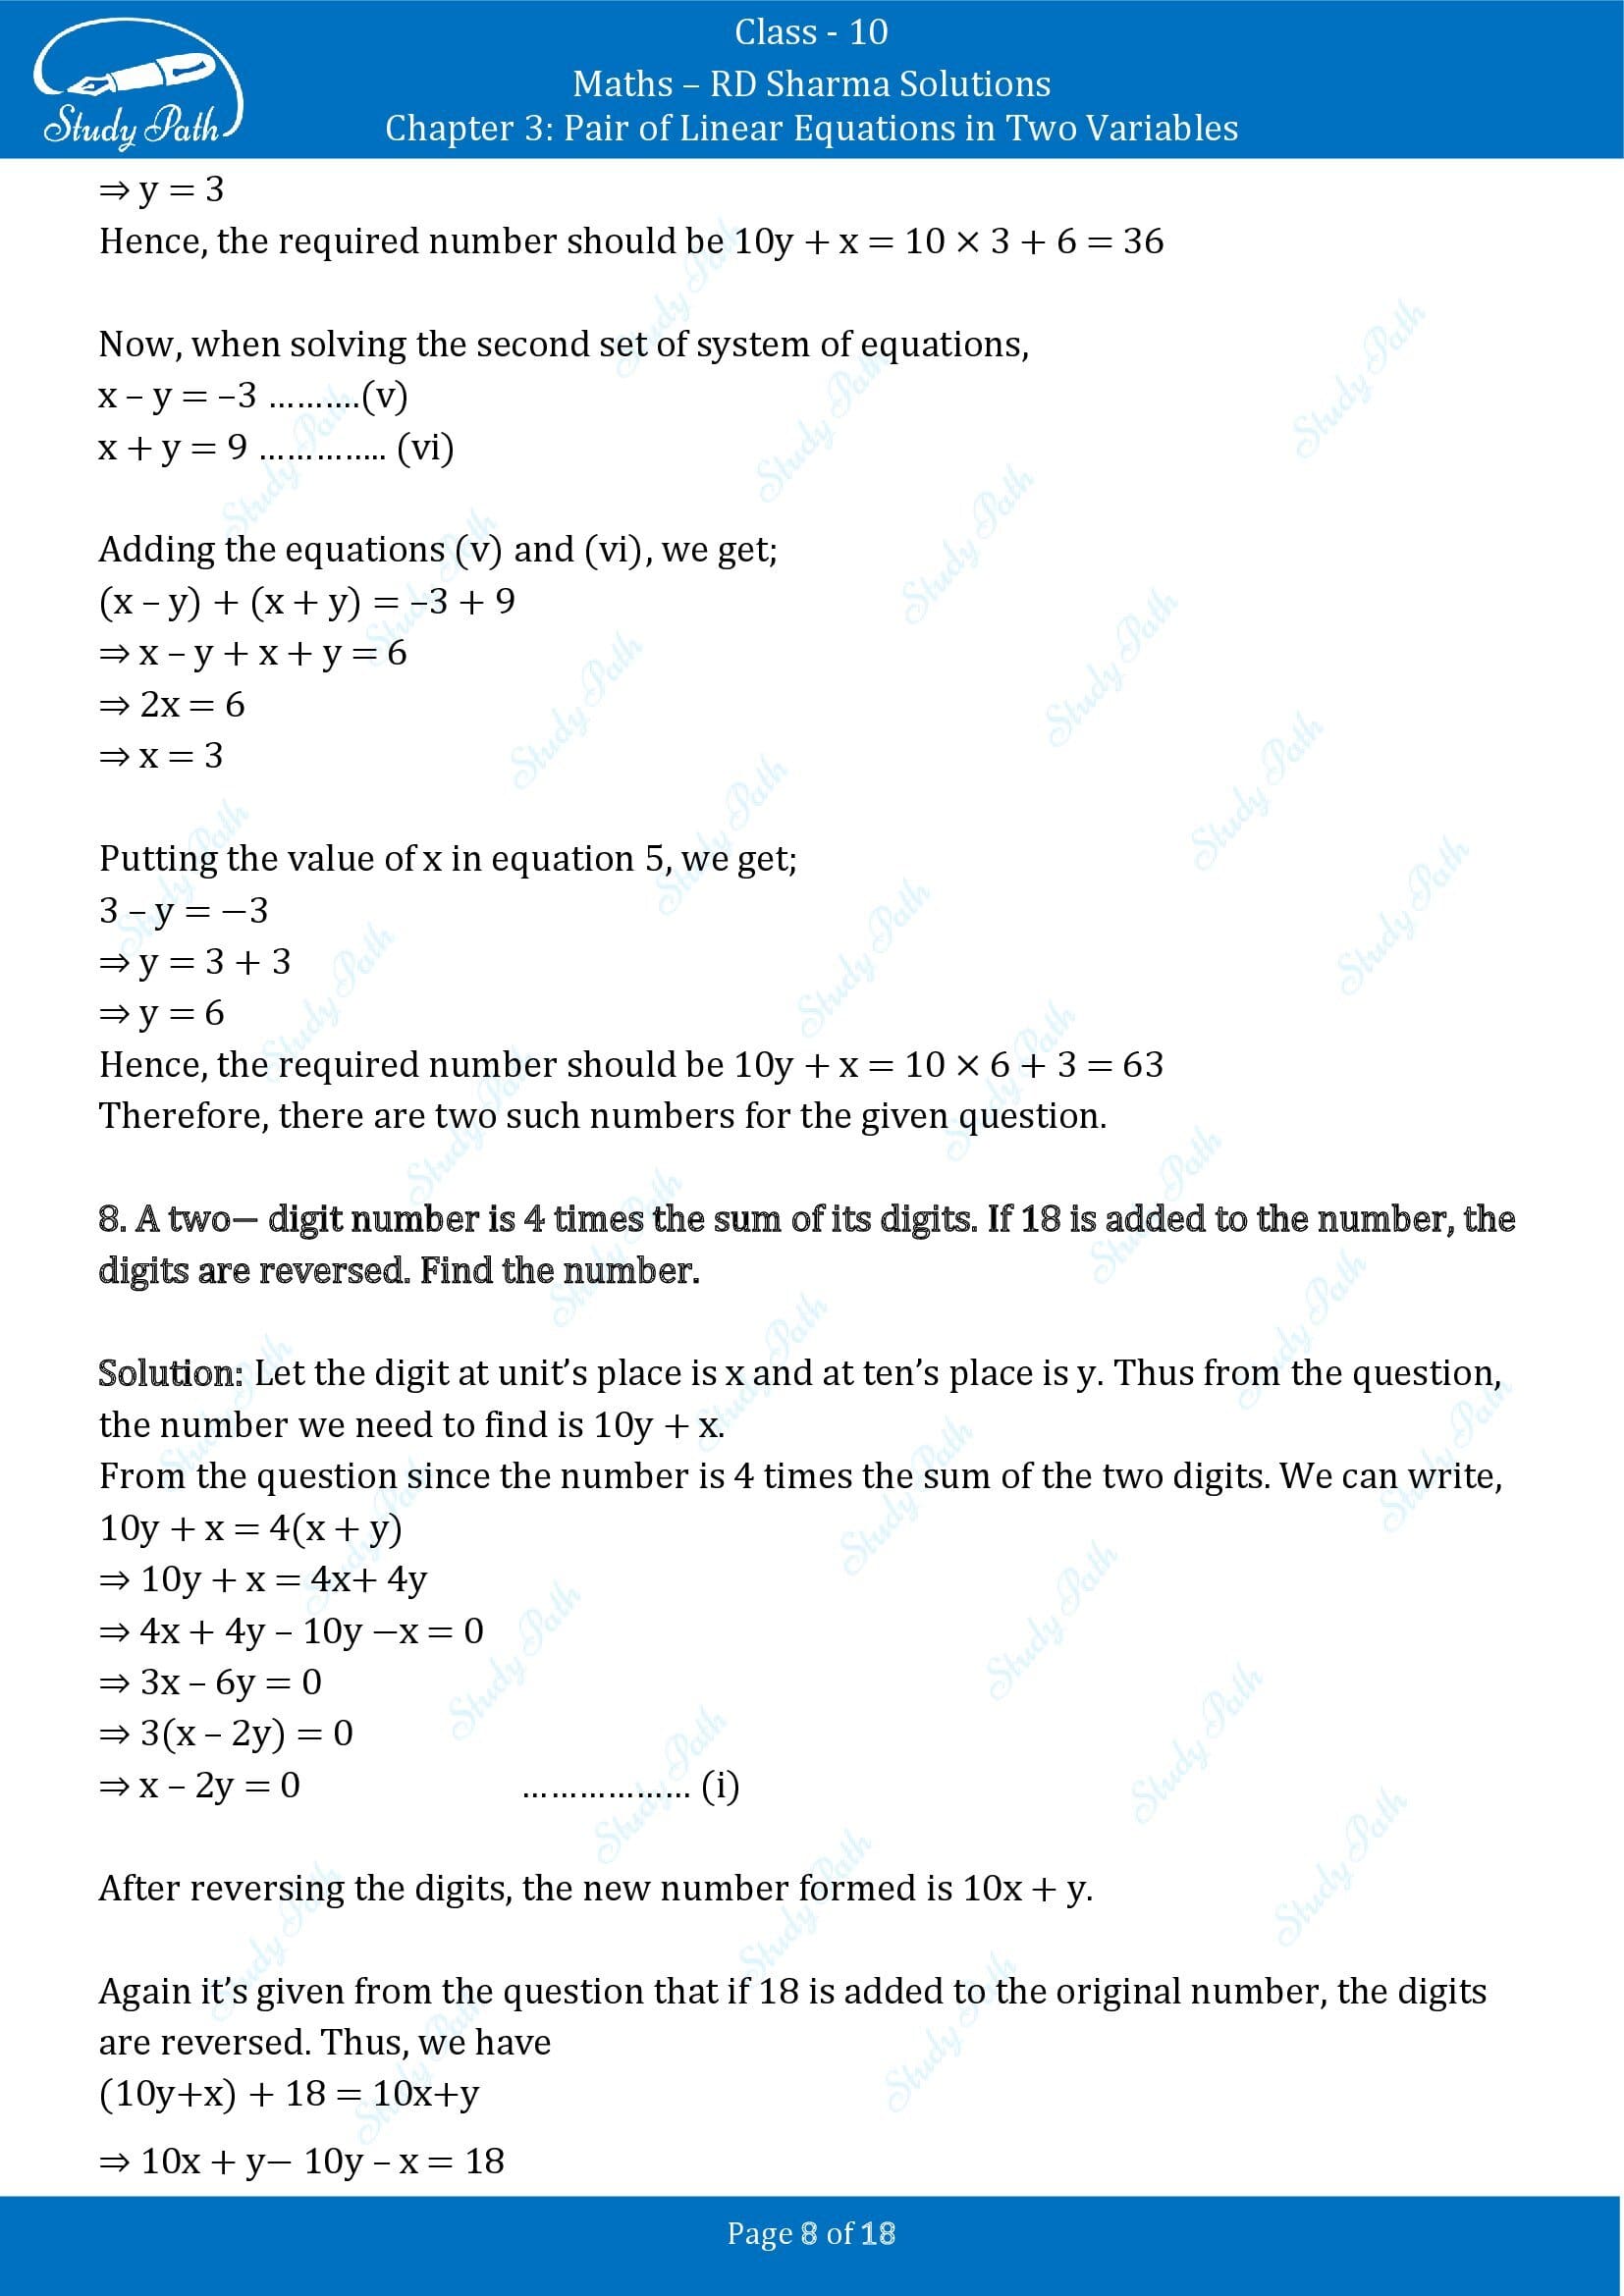 RD Sharma Solutions Class 10 Chapter 3 Pair of Linear Equations in Two Variables Exercise 3.7 00008